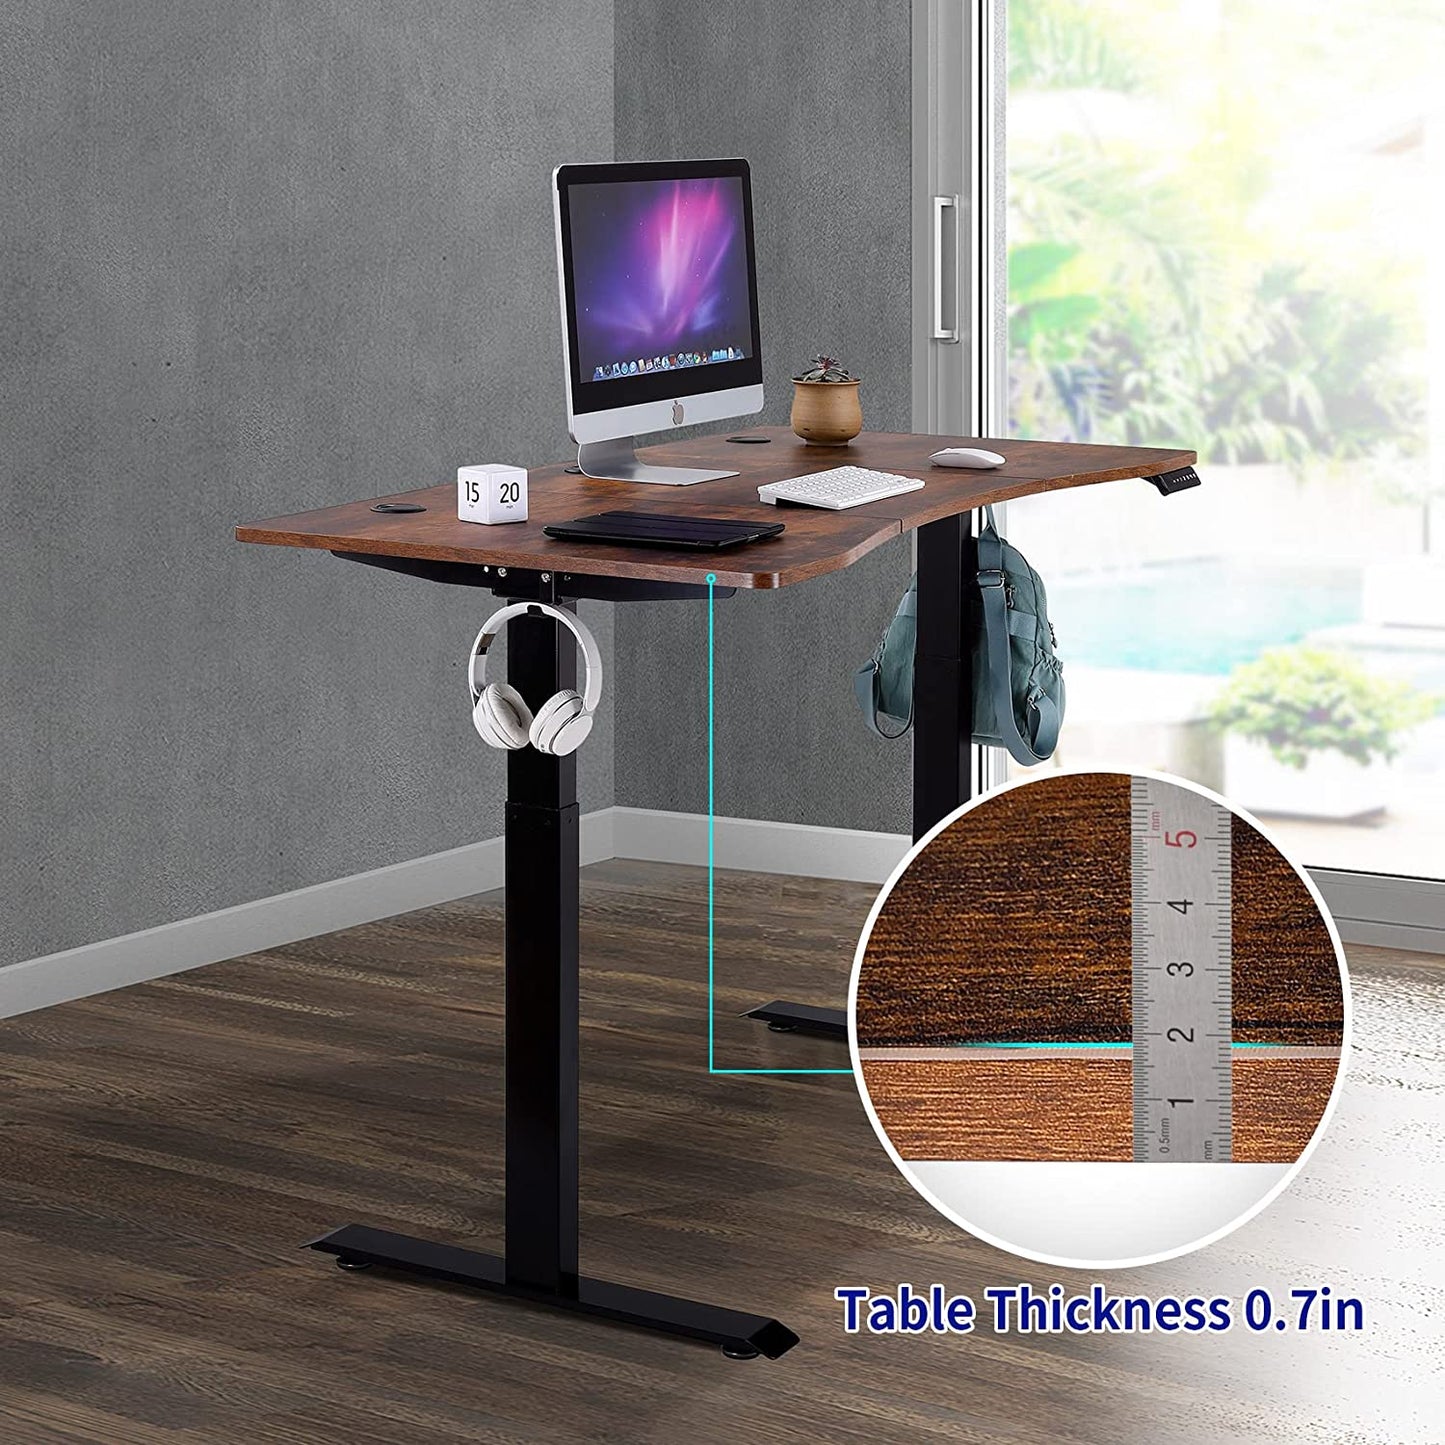 UNICOO - Dual Motor Electric Height Adjustable Standing Desk 59"x29.5" Inches, Home Office Computer Desk, Gaming Desk, with USB Charging and Hooks (XOT-D59)